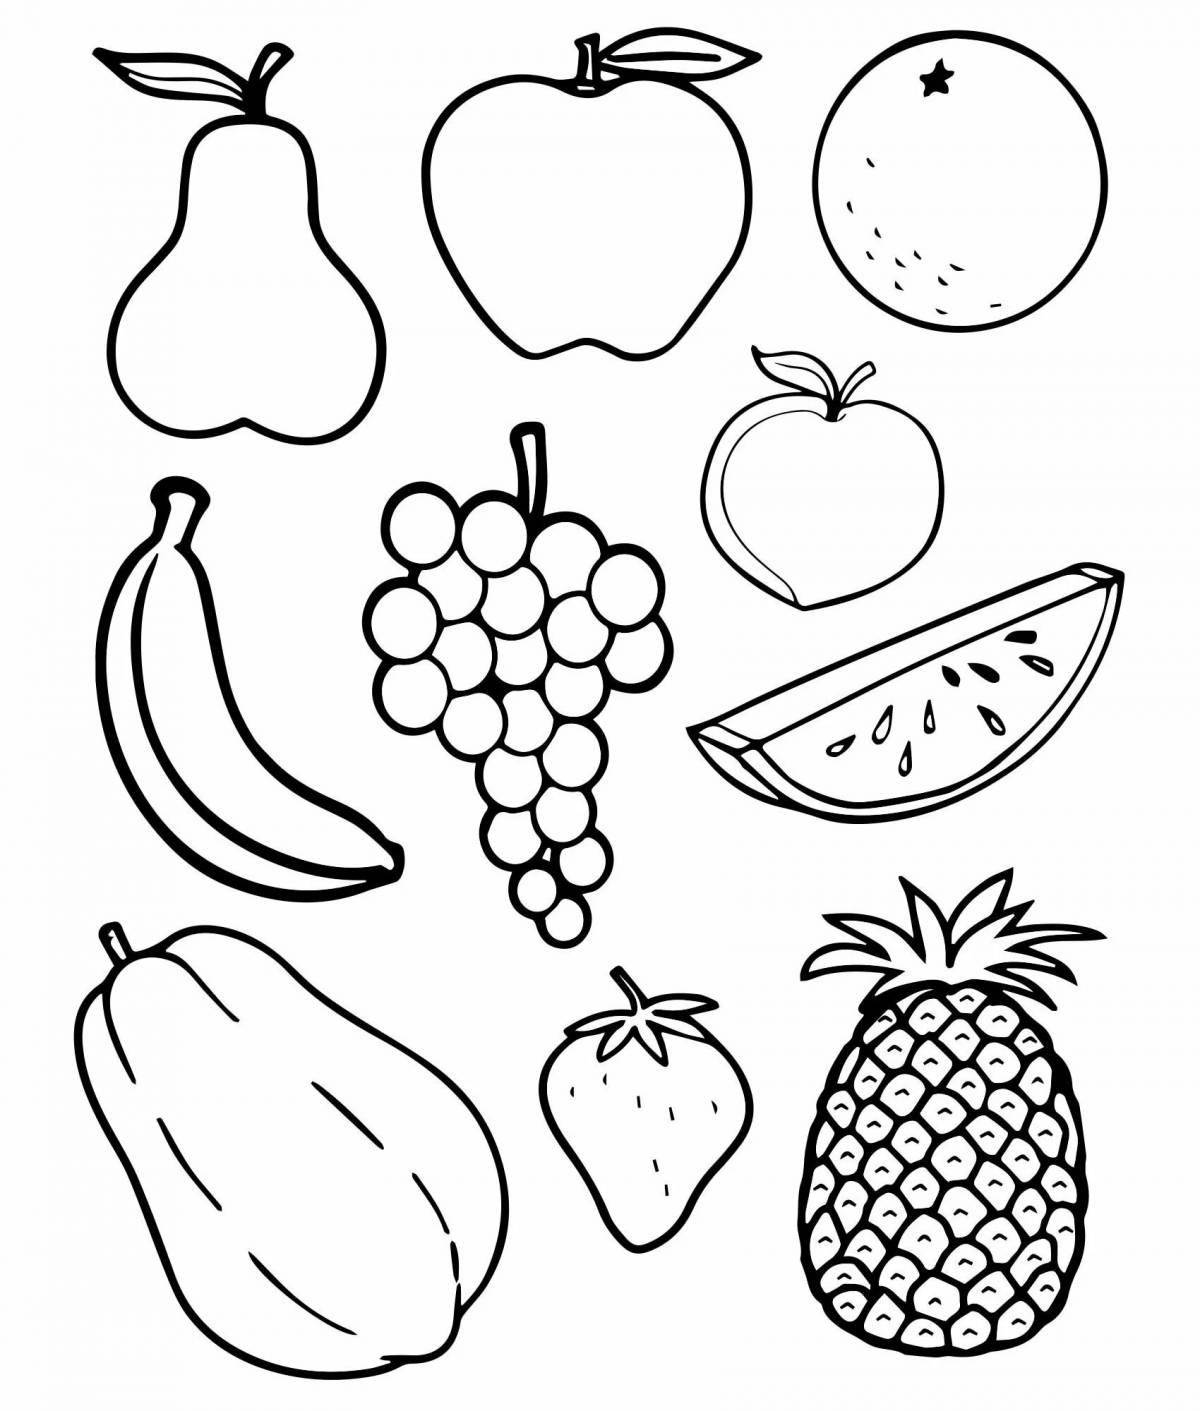 Exciting fruit and vegetable coloring pages